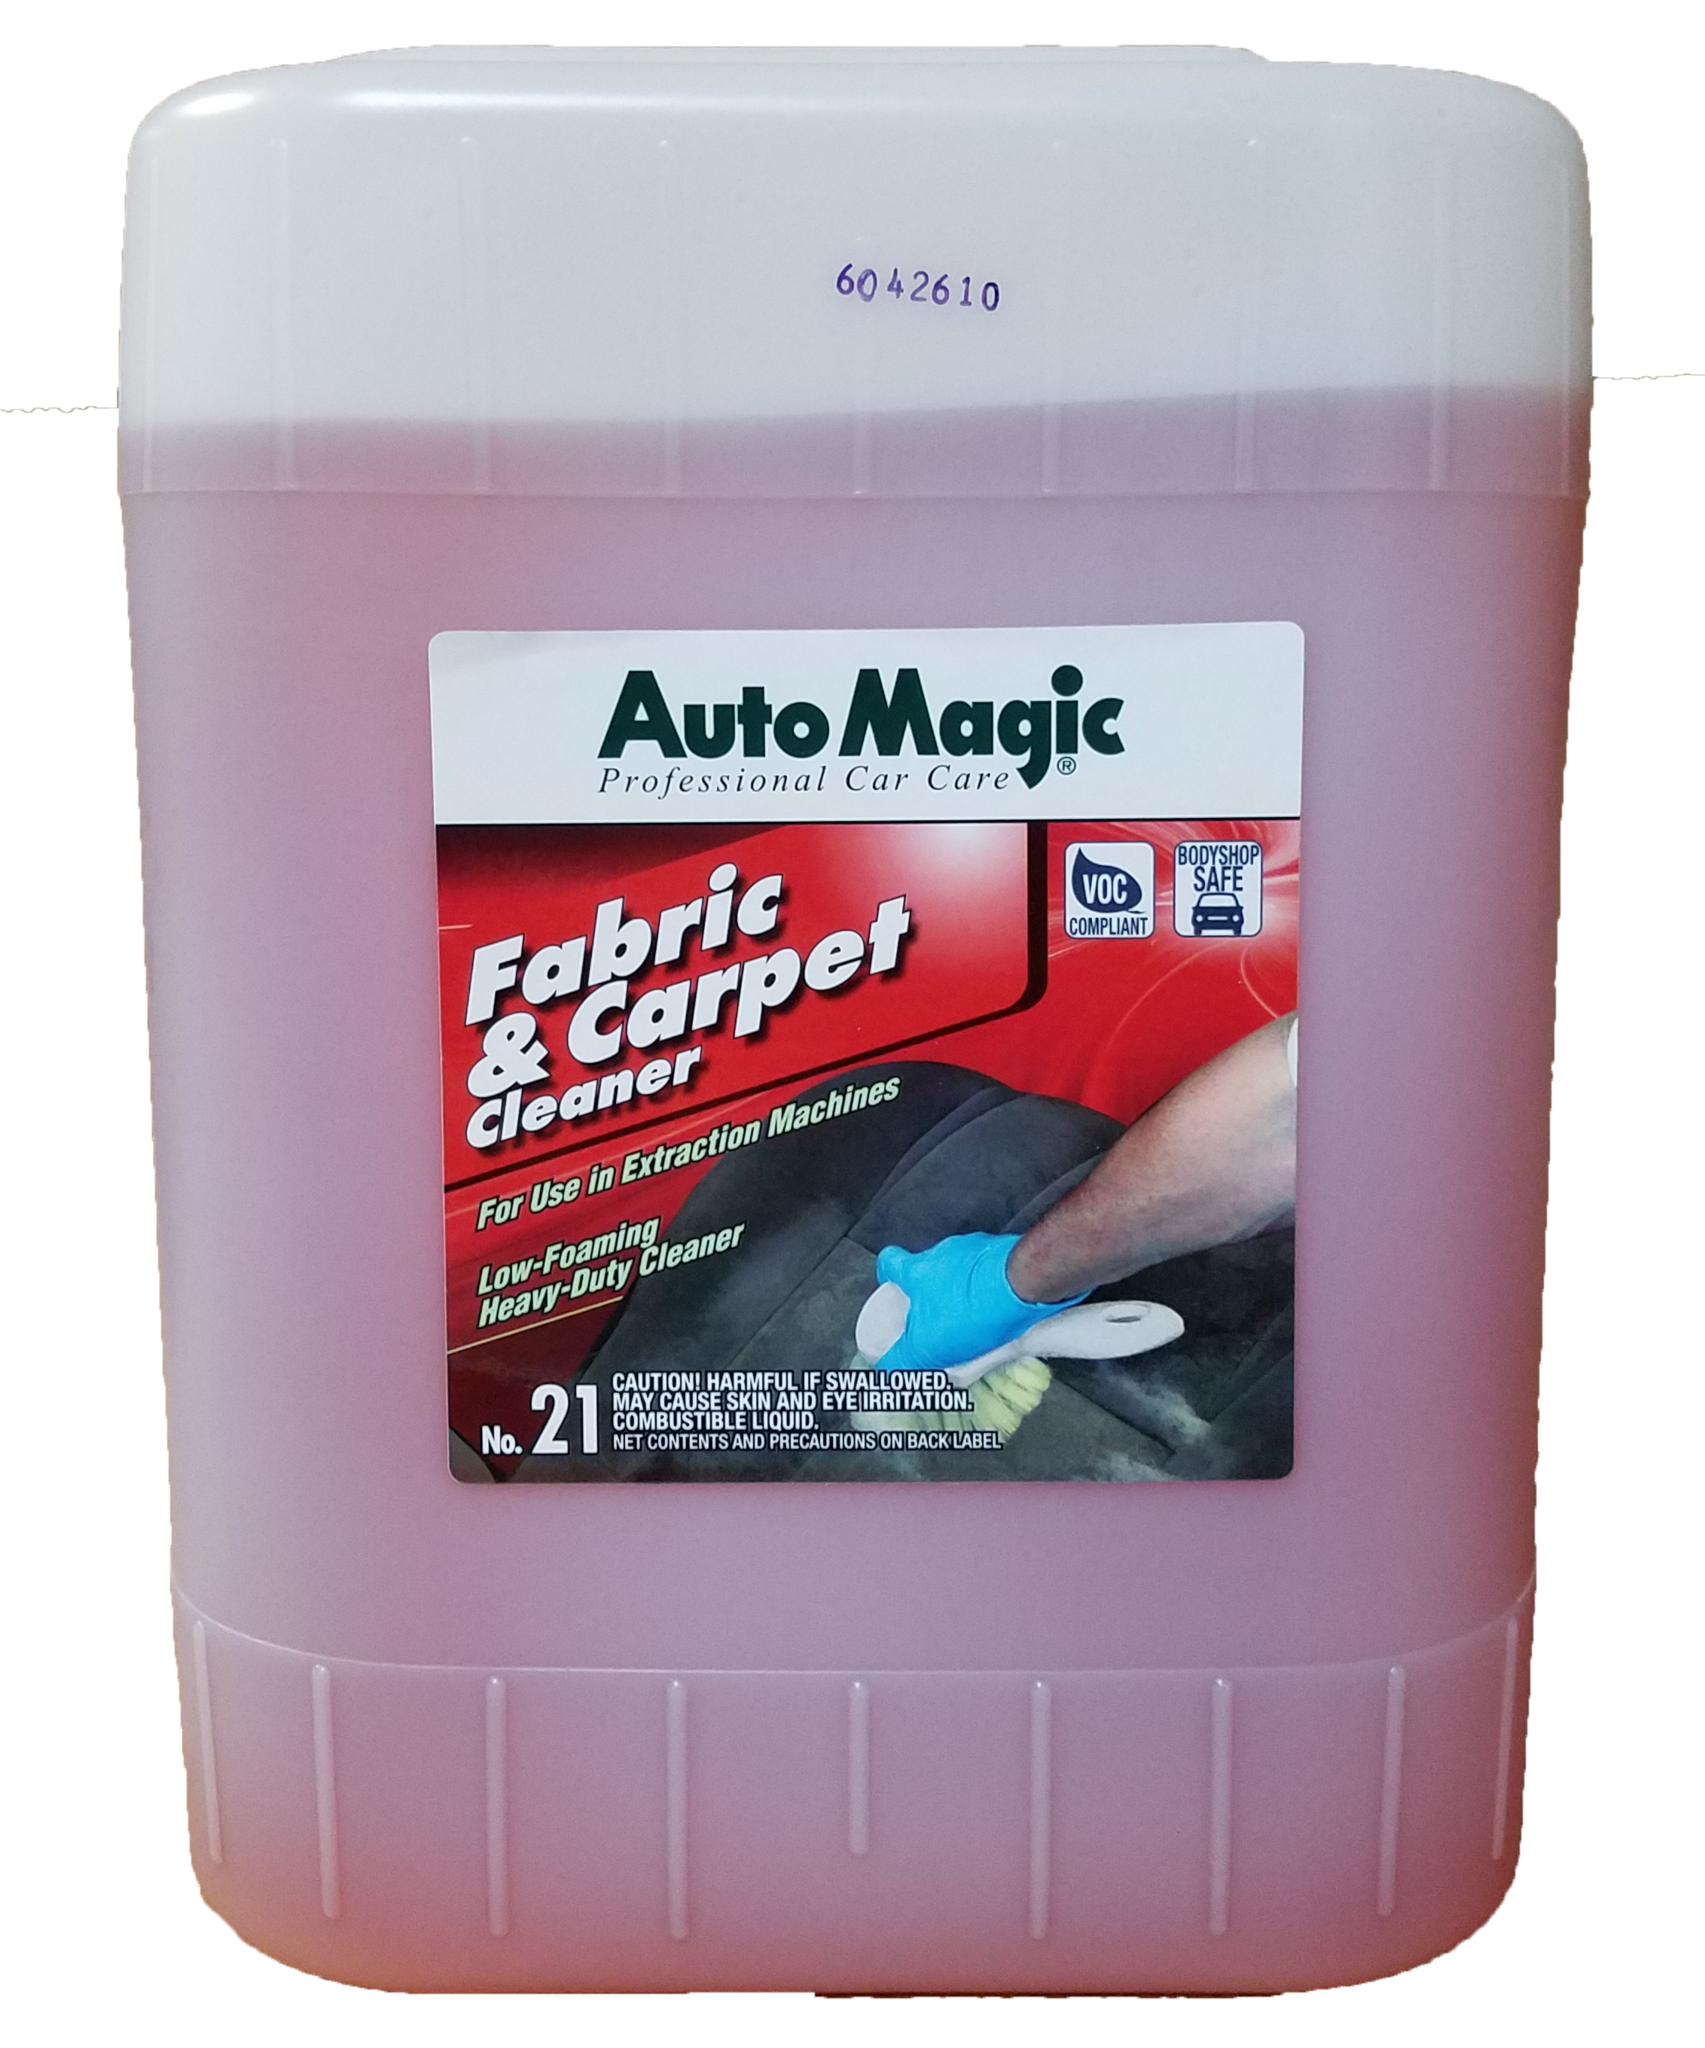 Auto Magic Fabric & Carpet Cleaner, for us with extractor machines